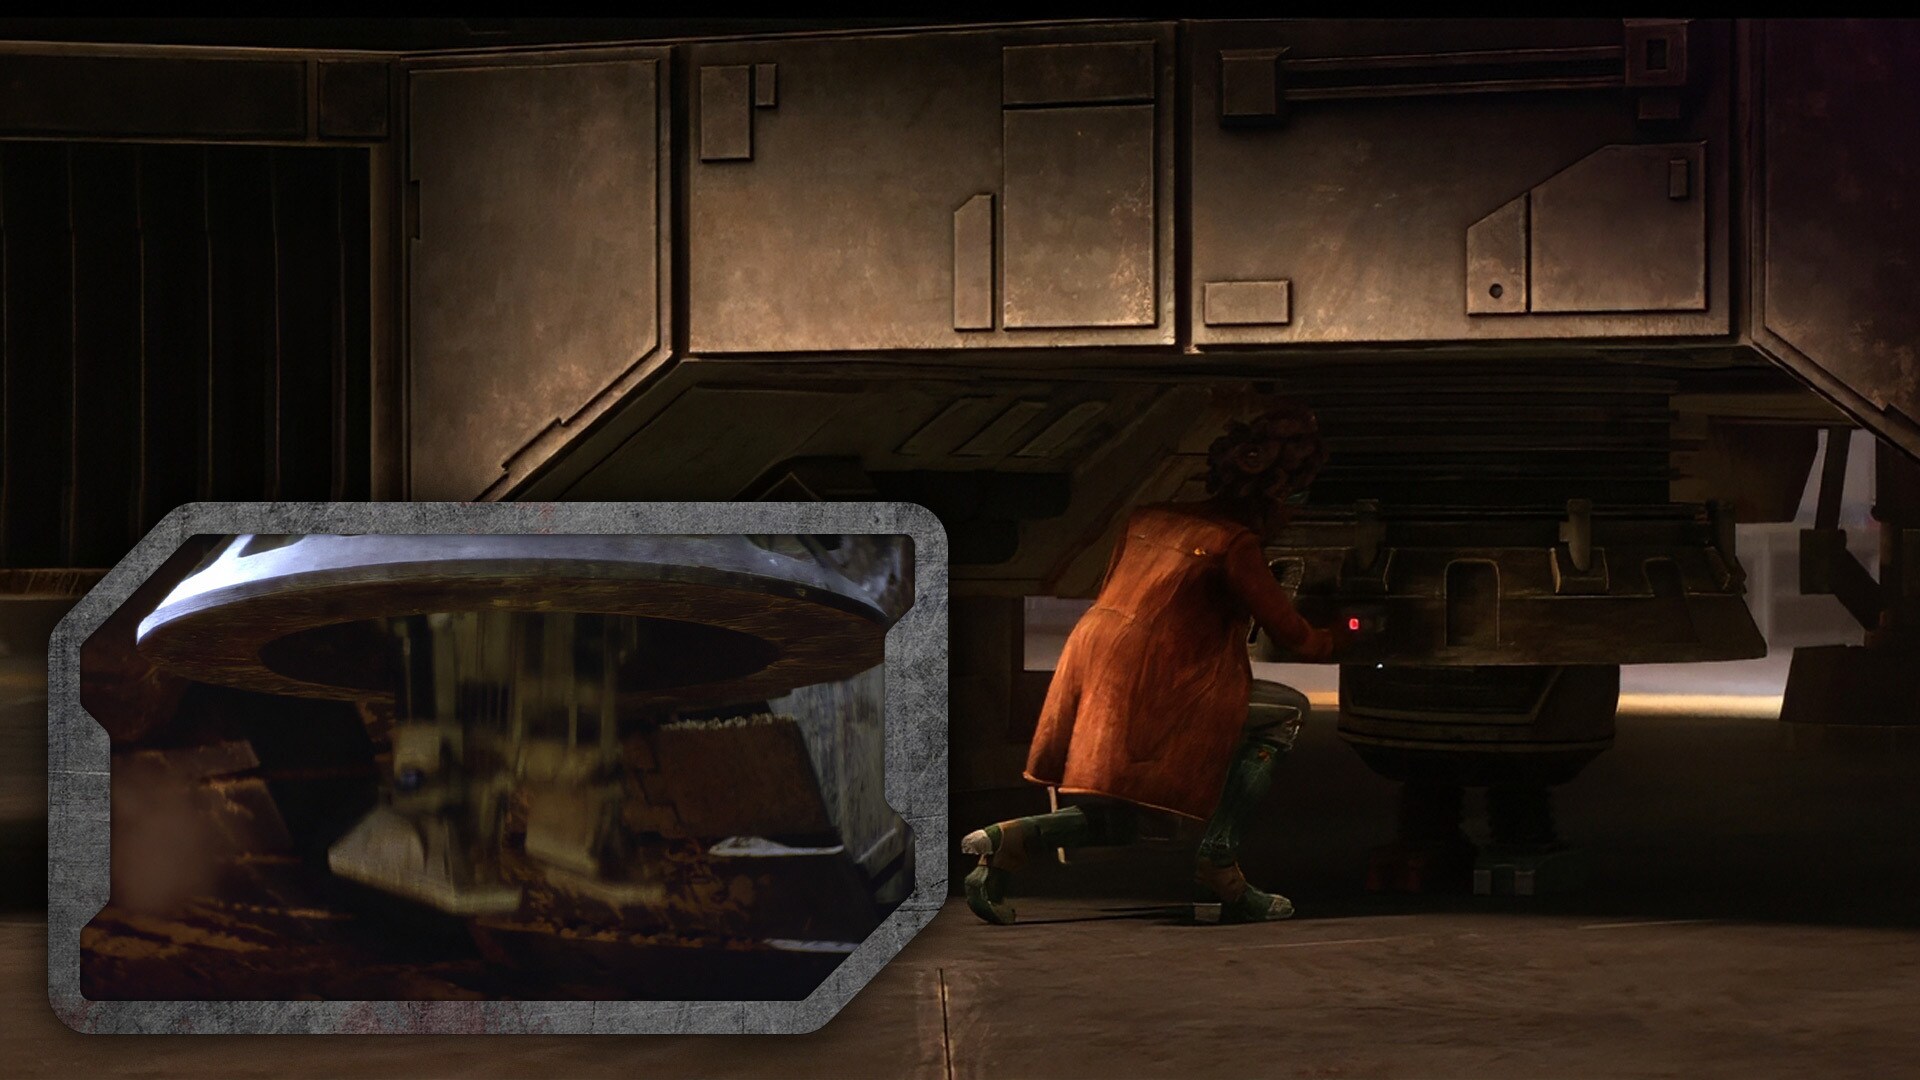 The device used to bring Phee's droid Mel on and off her ship is similar to the suction tube that Jawas employed to pull R2-D2 into their sandcrawler.